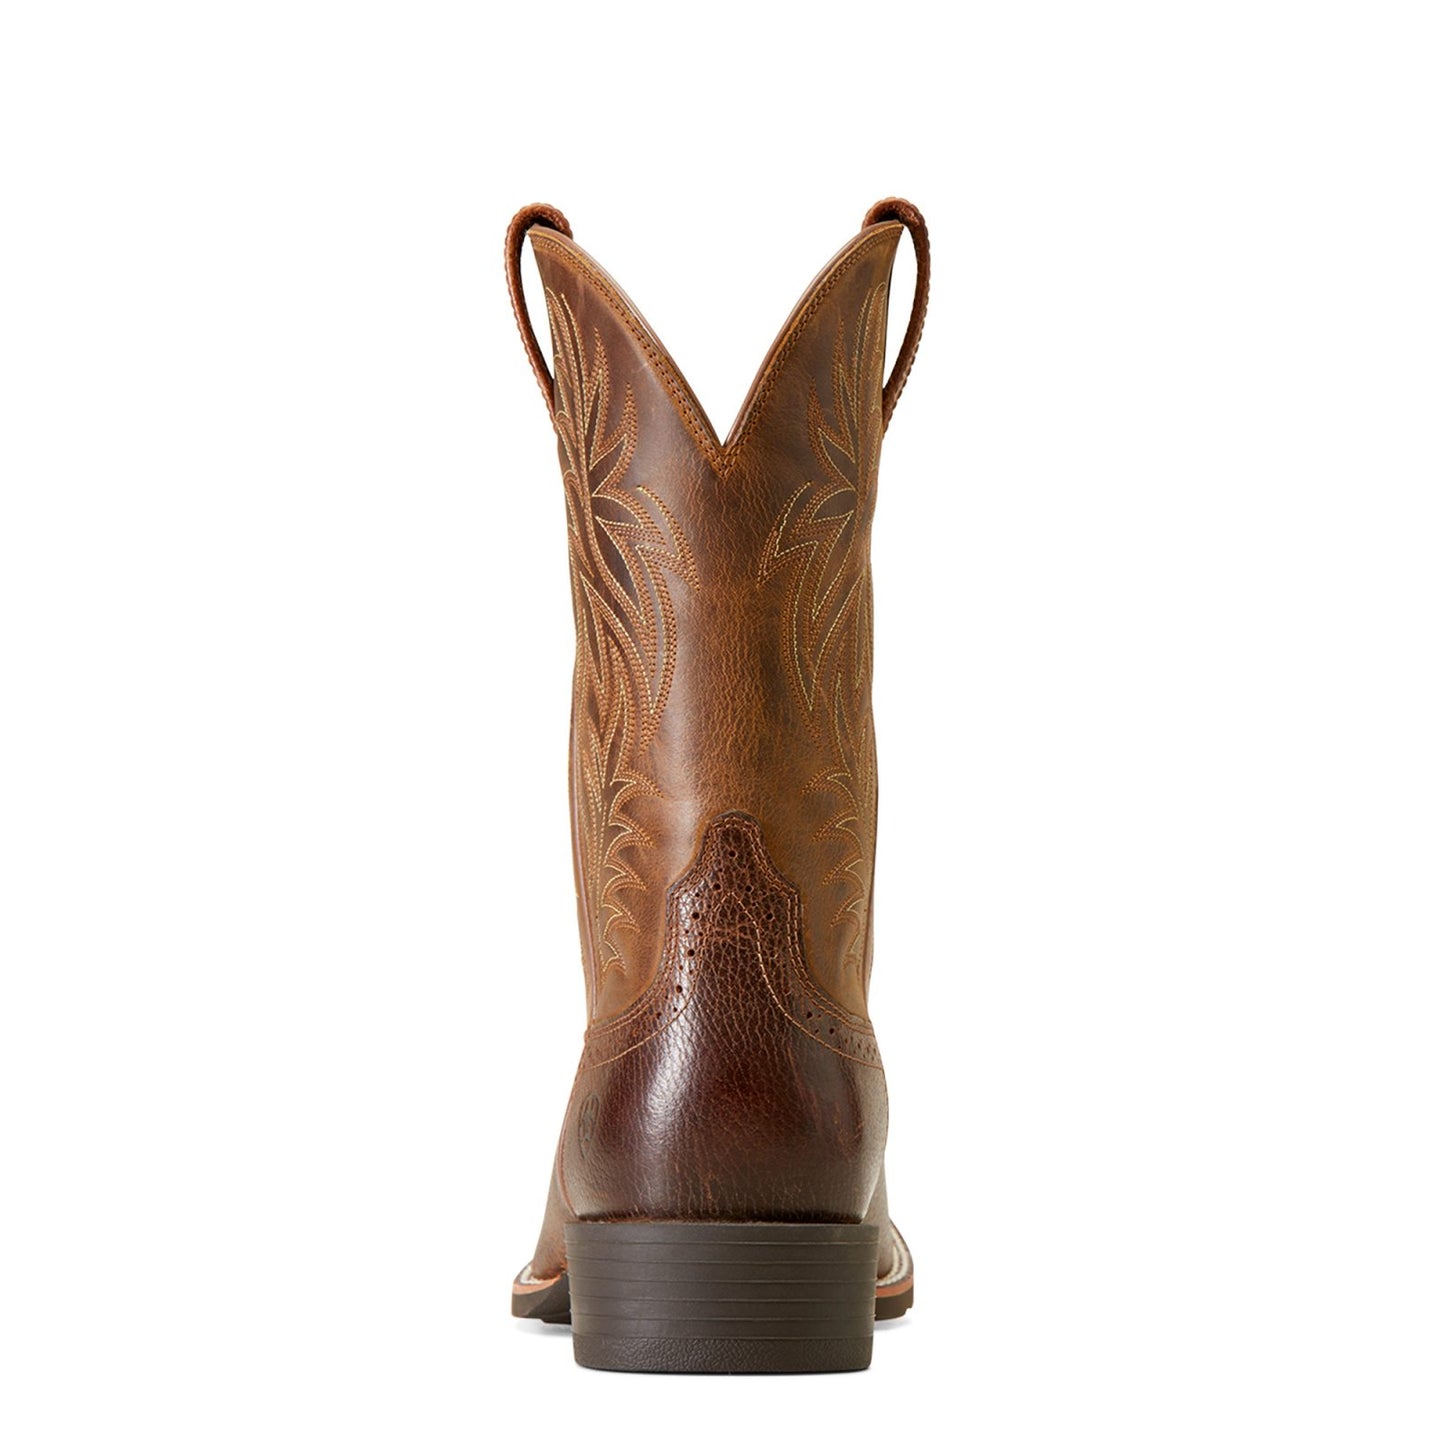 Ariat Men's Sport Wide Square Toe Western Boot - Fiddle Brown